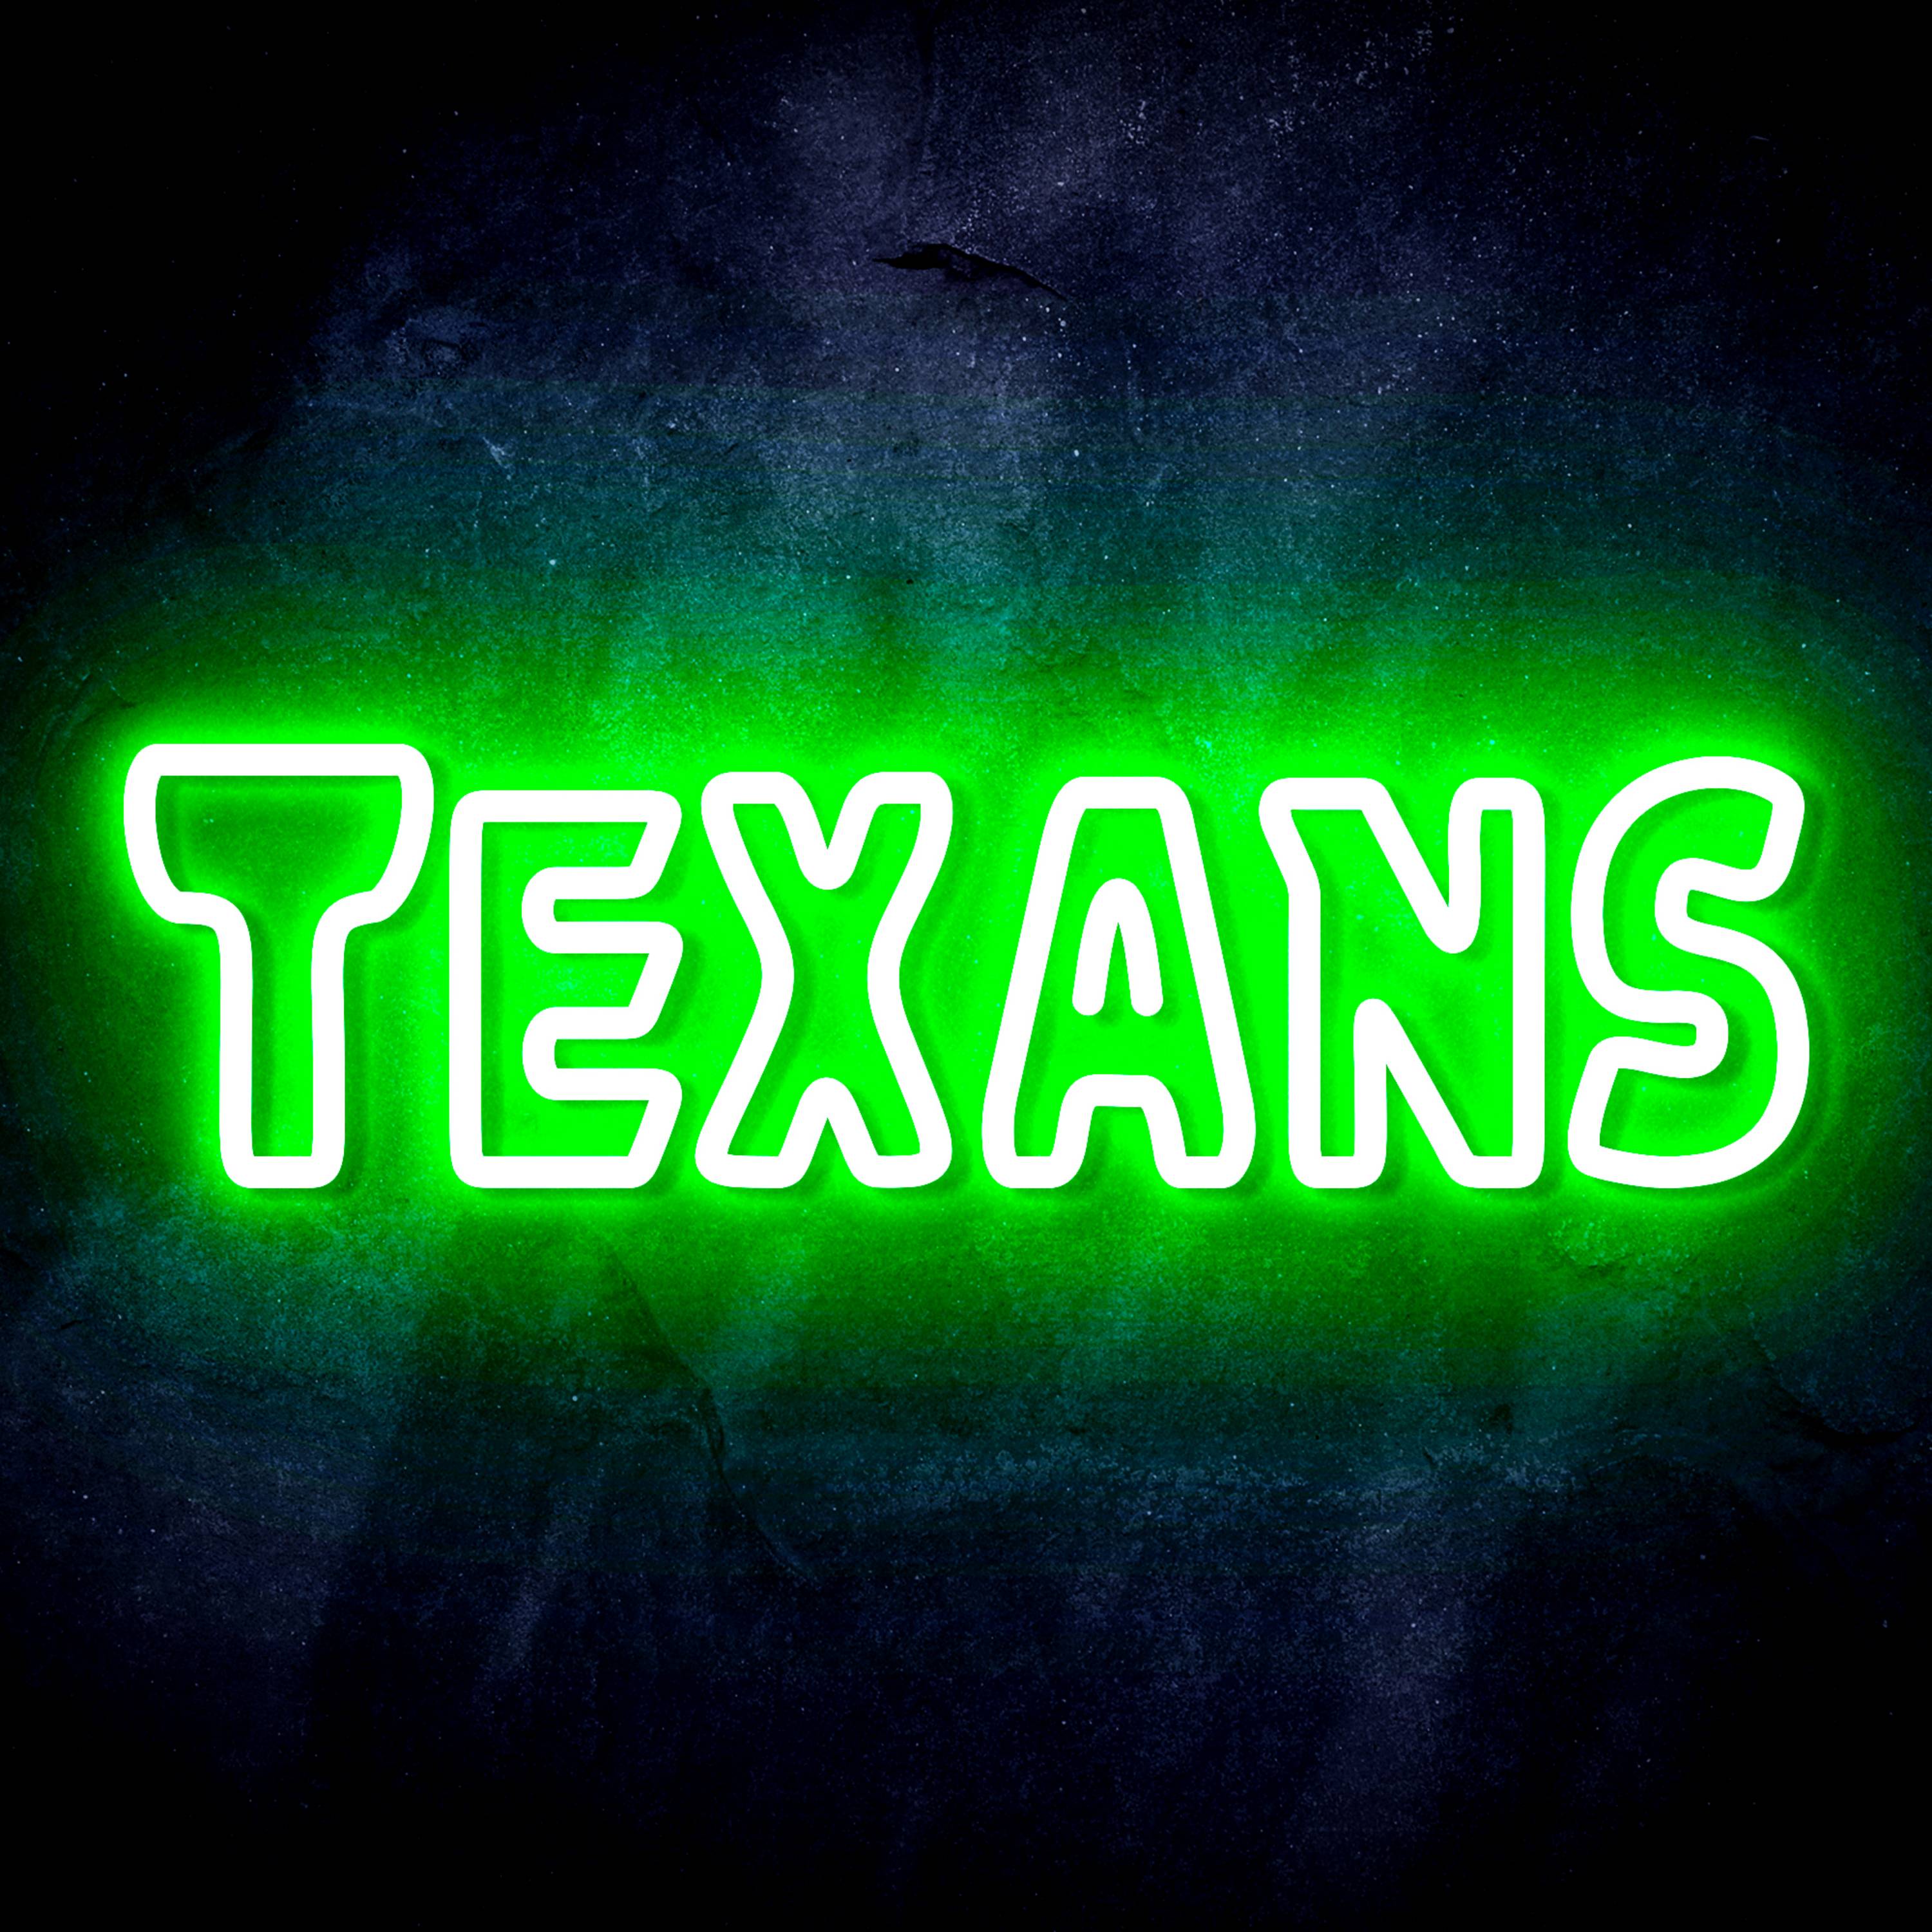 NFL TEXANS LED Neon Sign